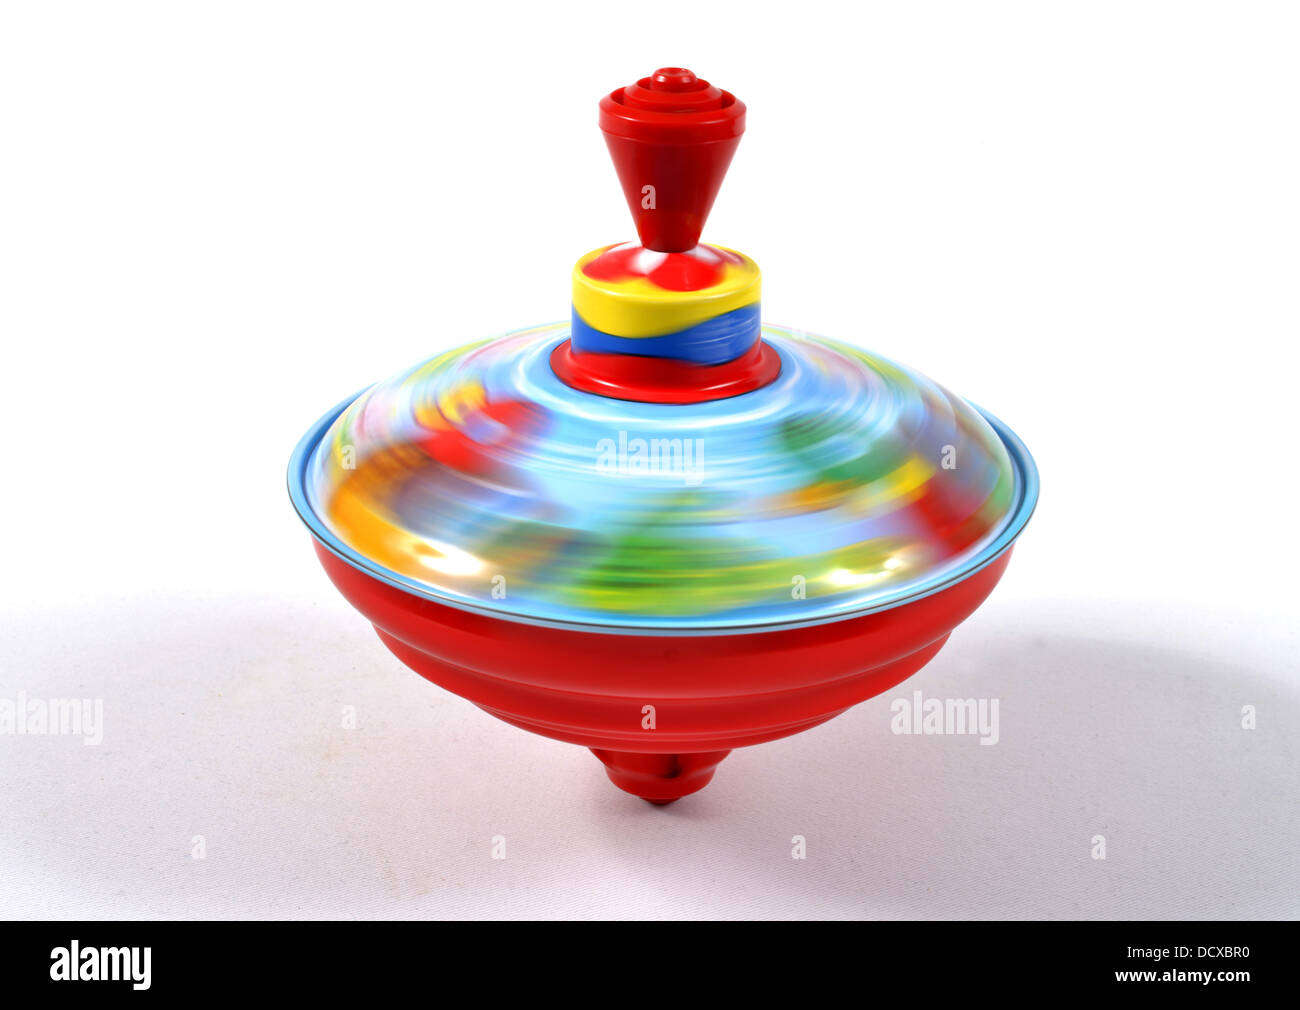 spinning top toy for children Stock Photo